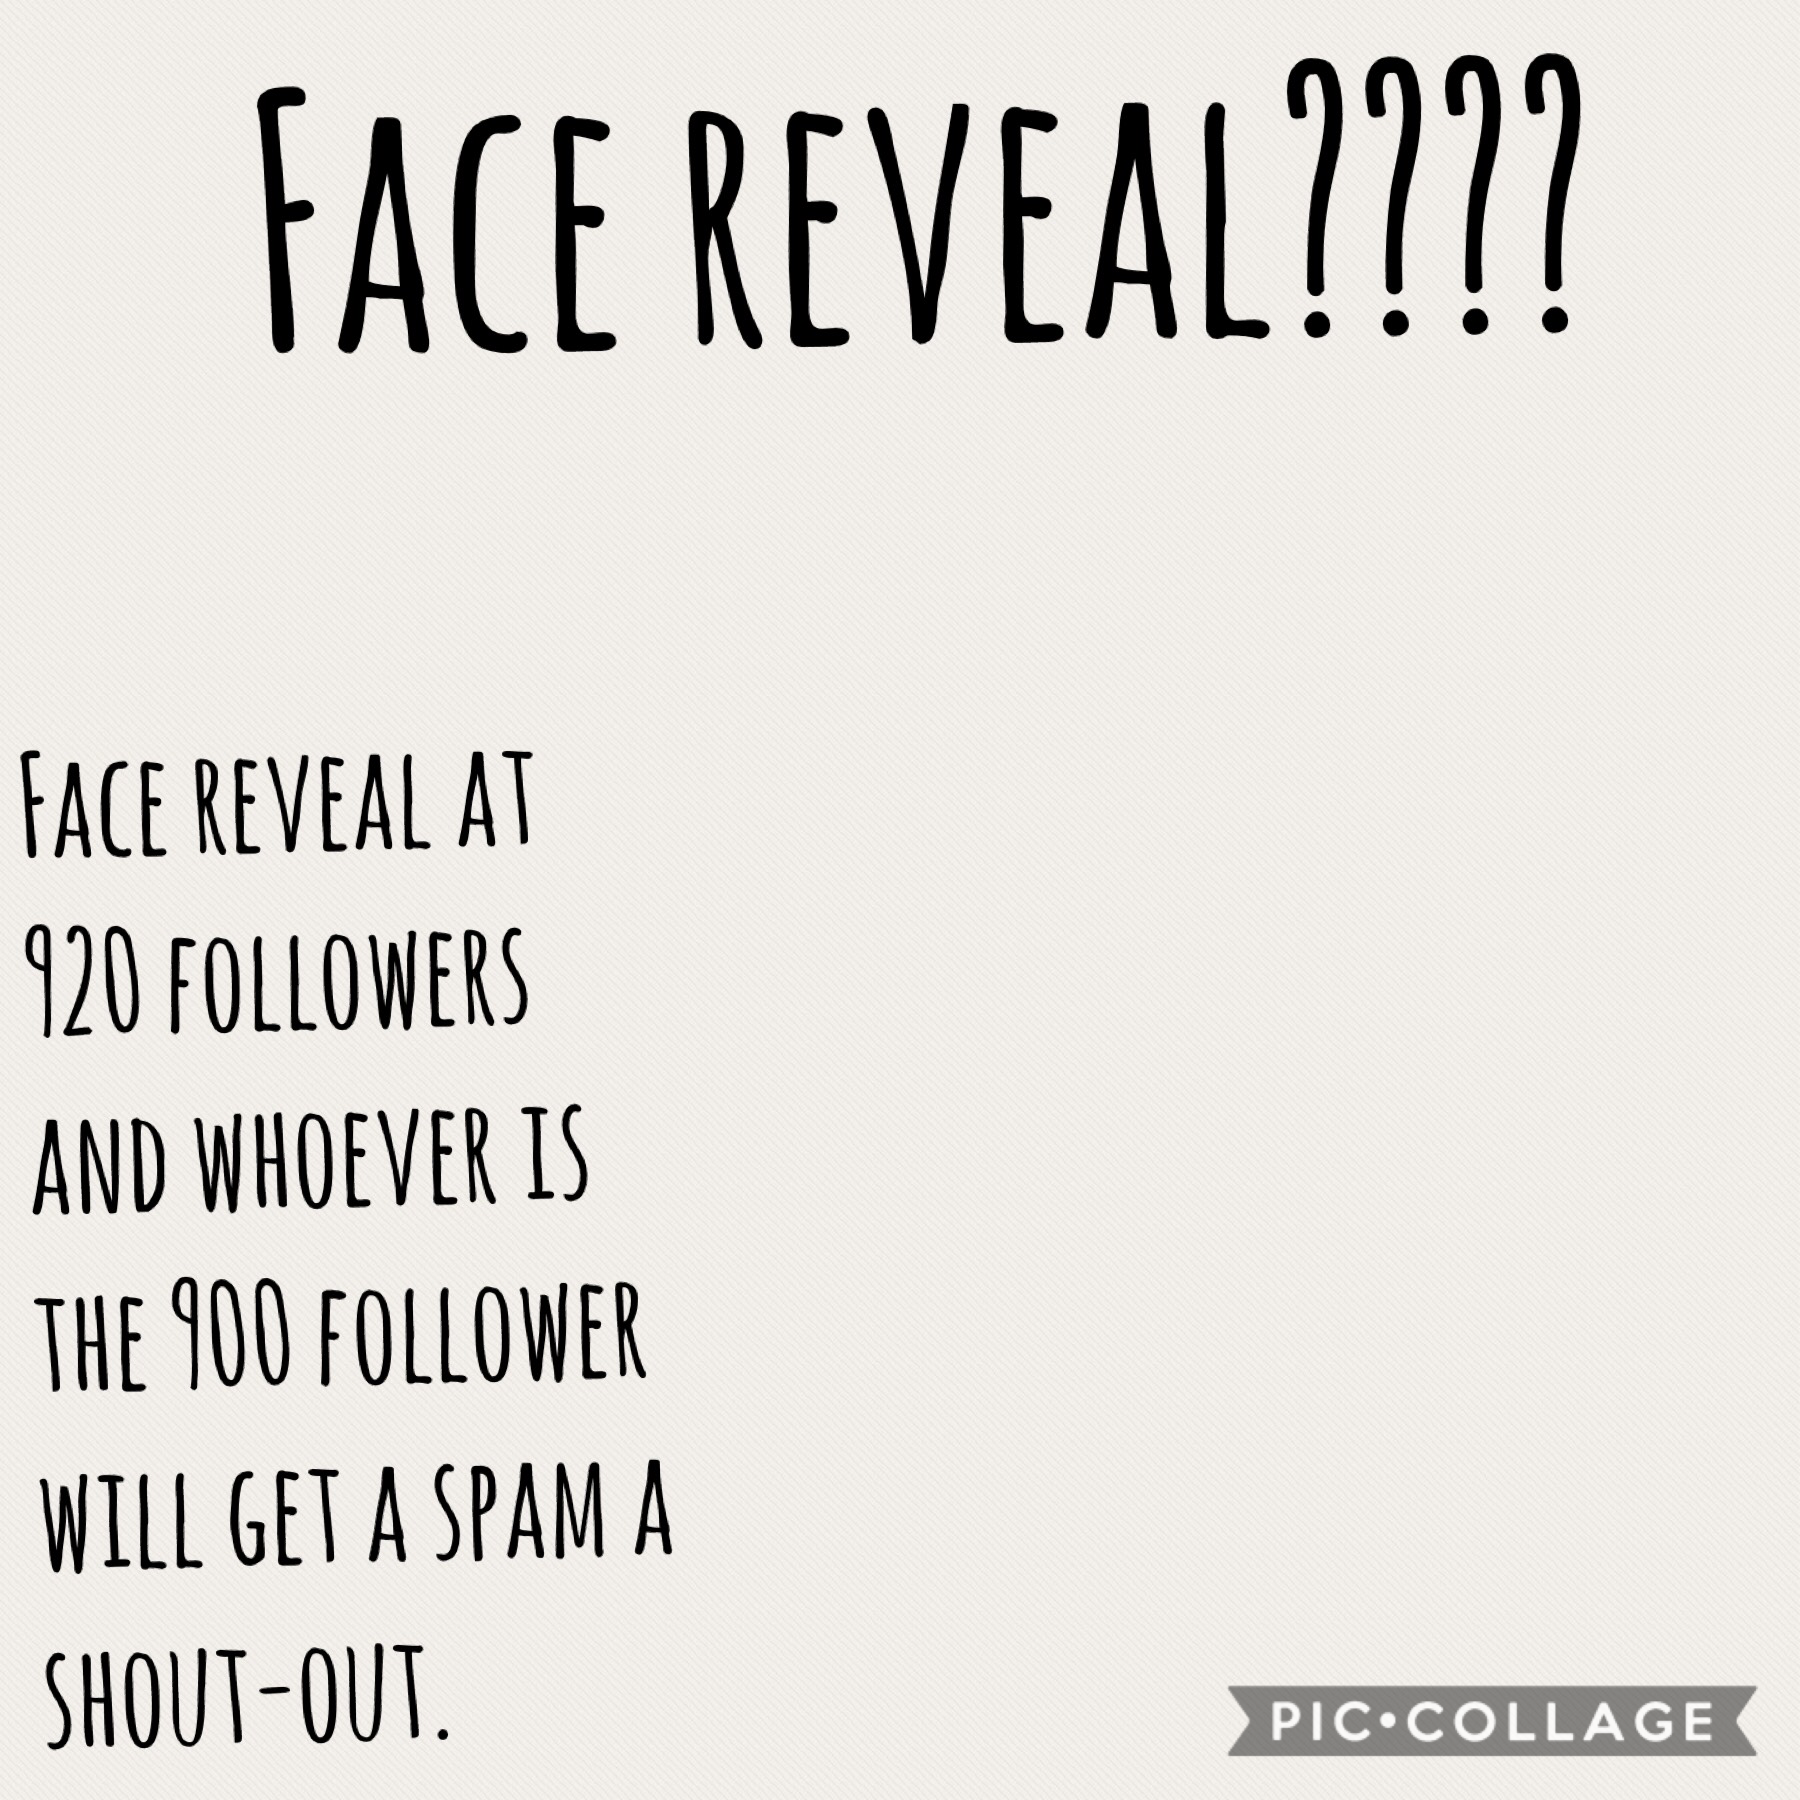 Face reveal??